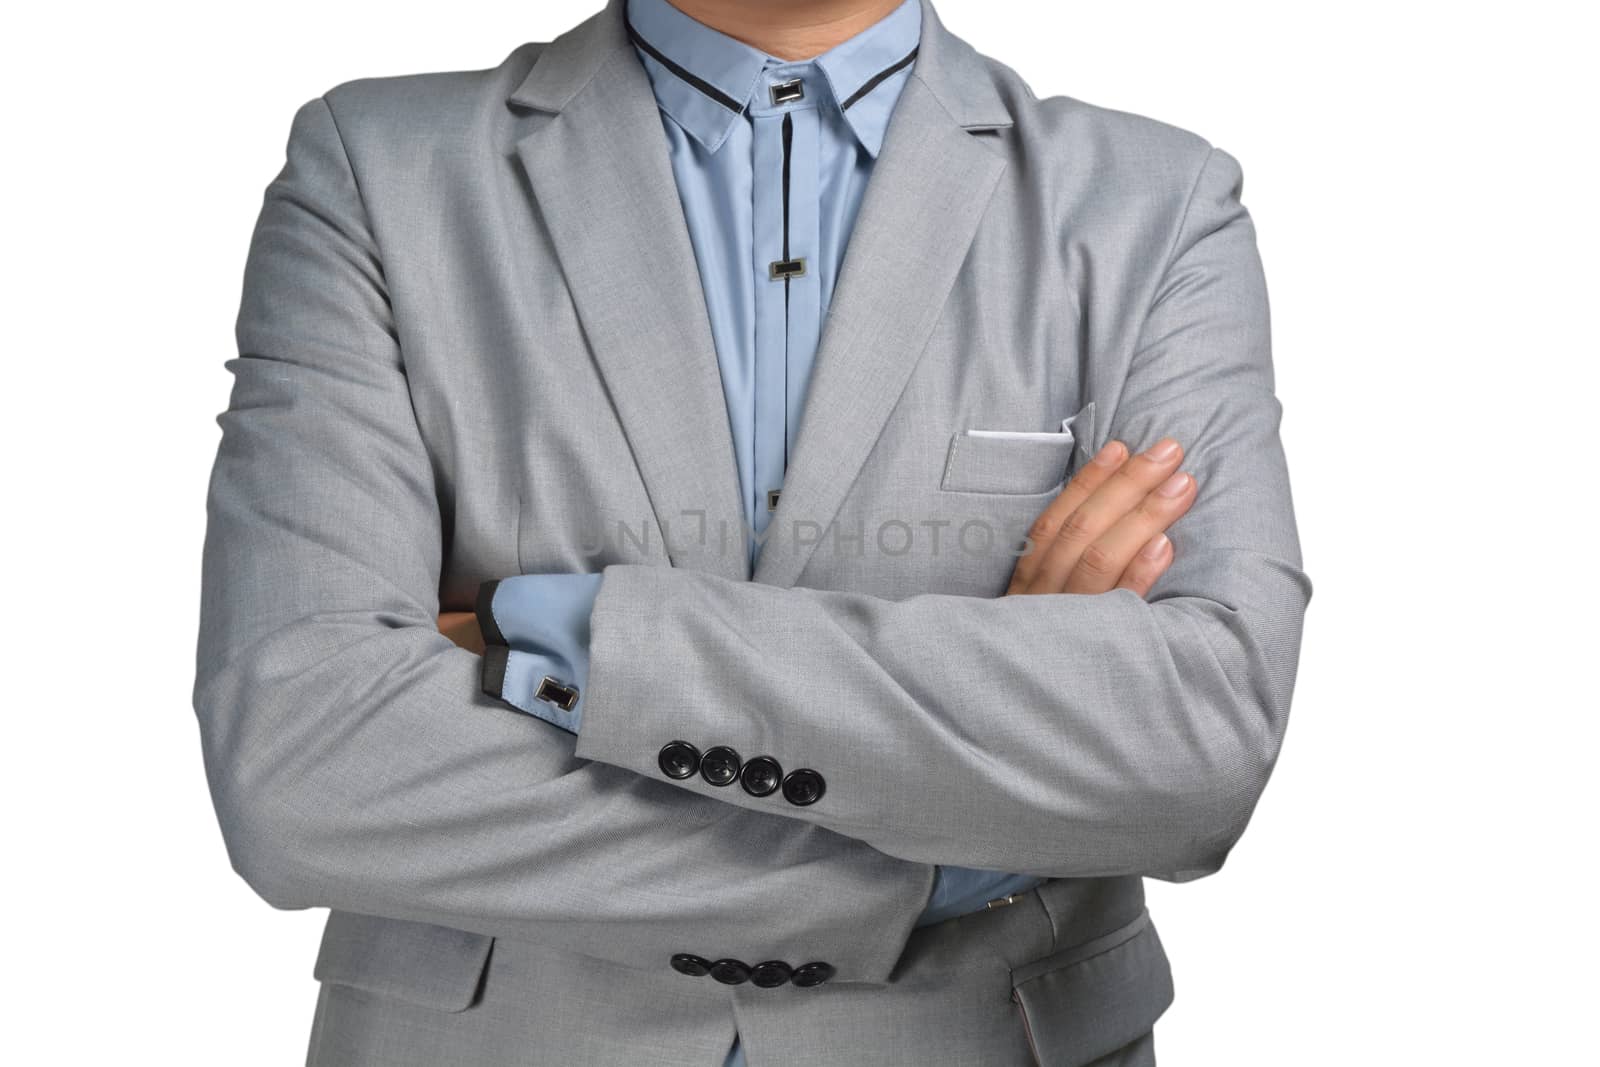 Body of Business Man wearing shirt and suit  by thampapon